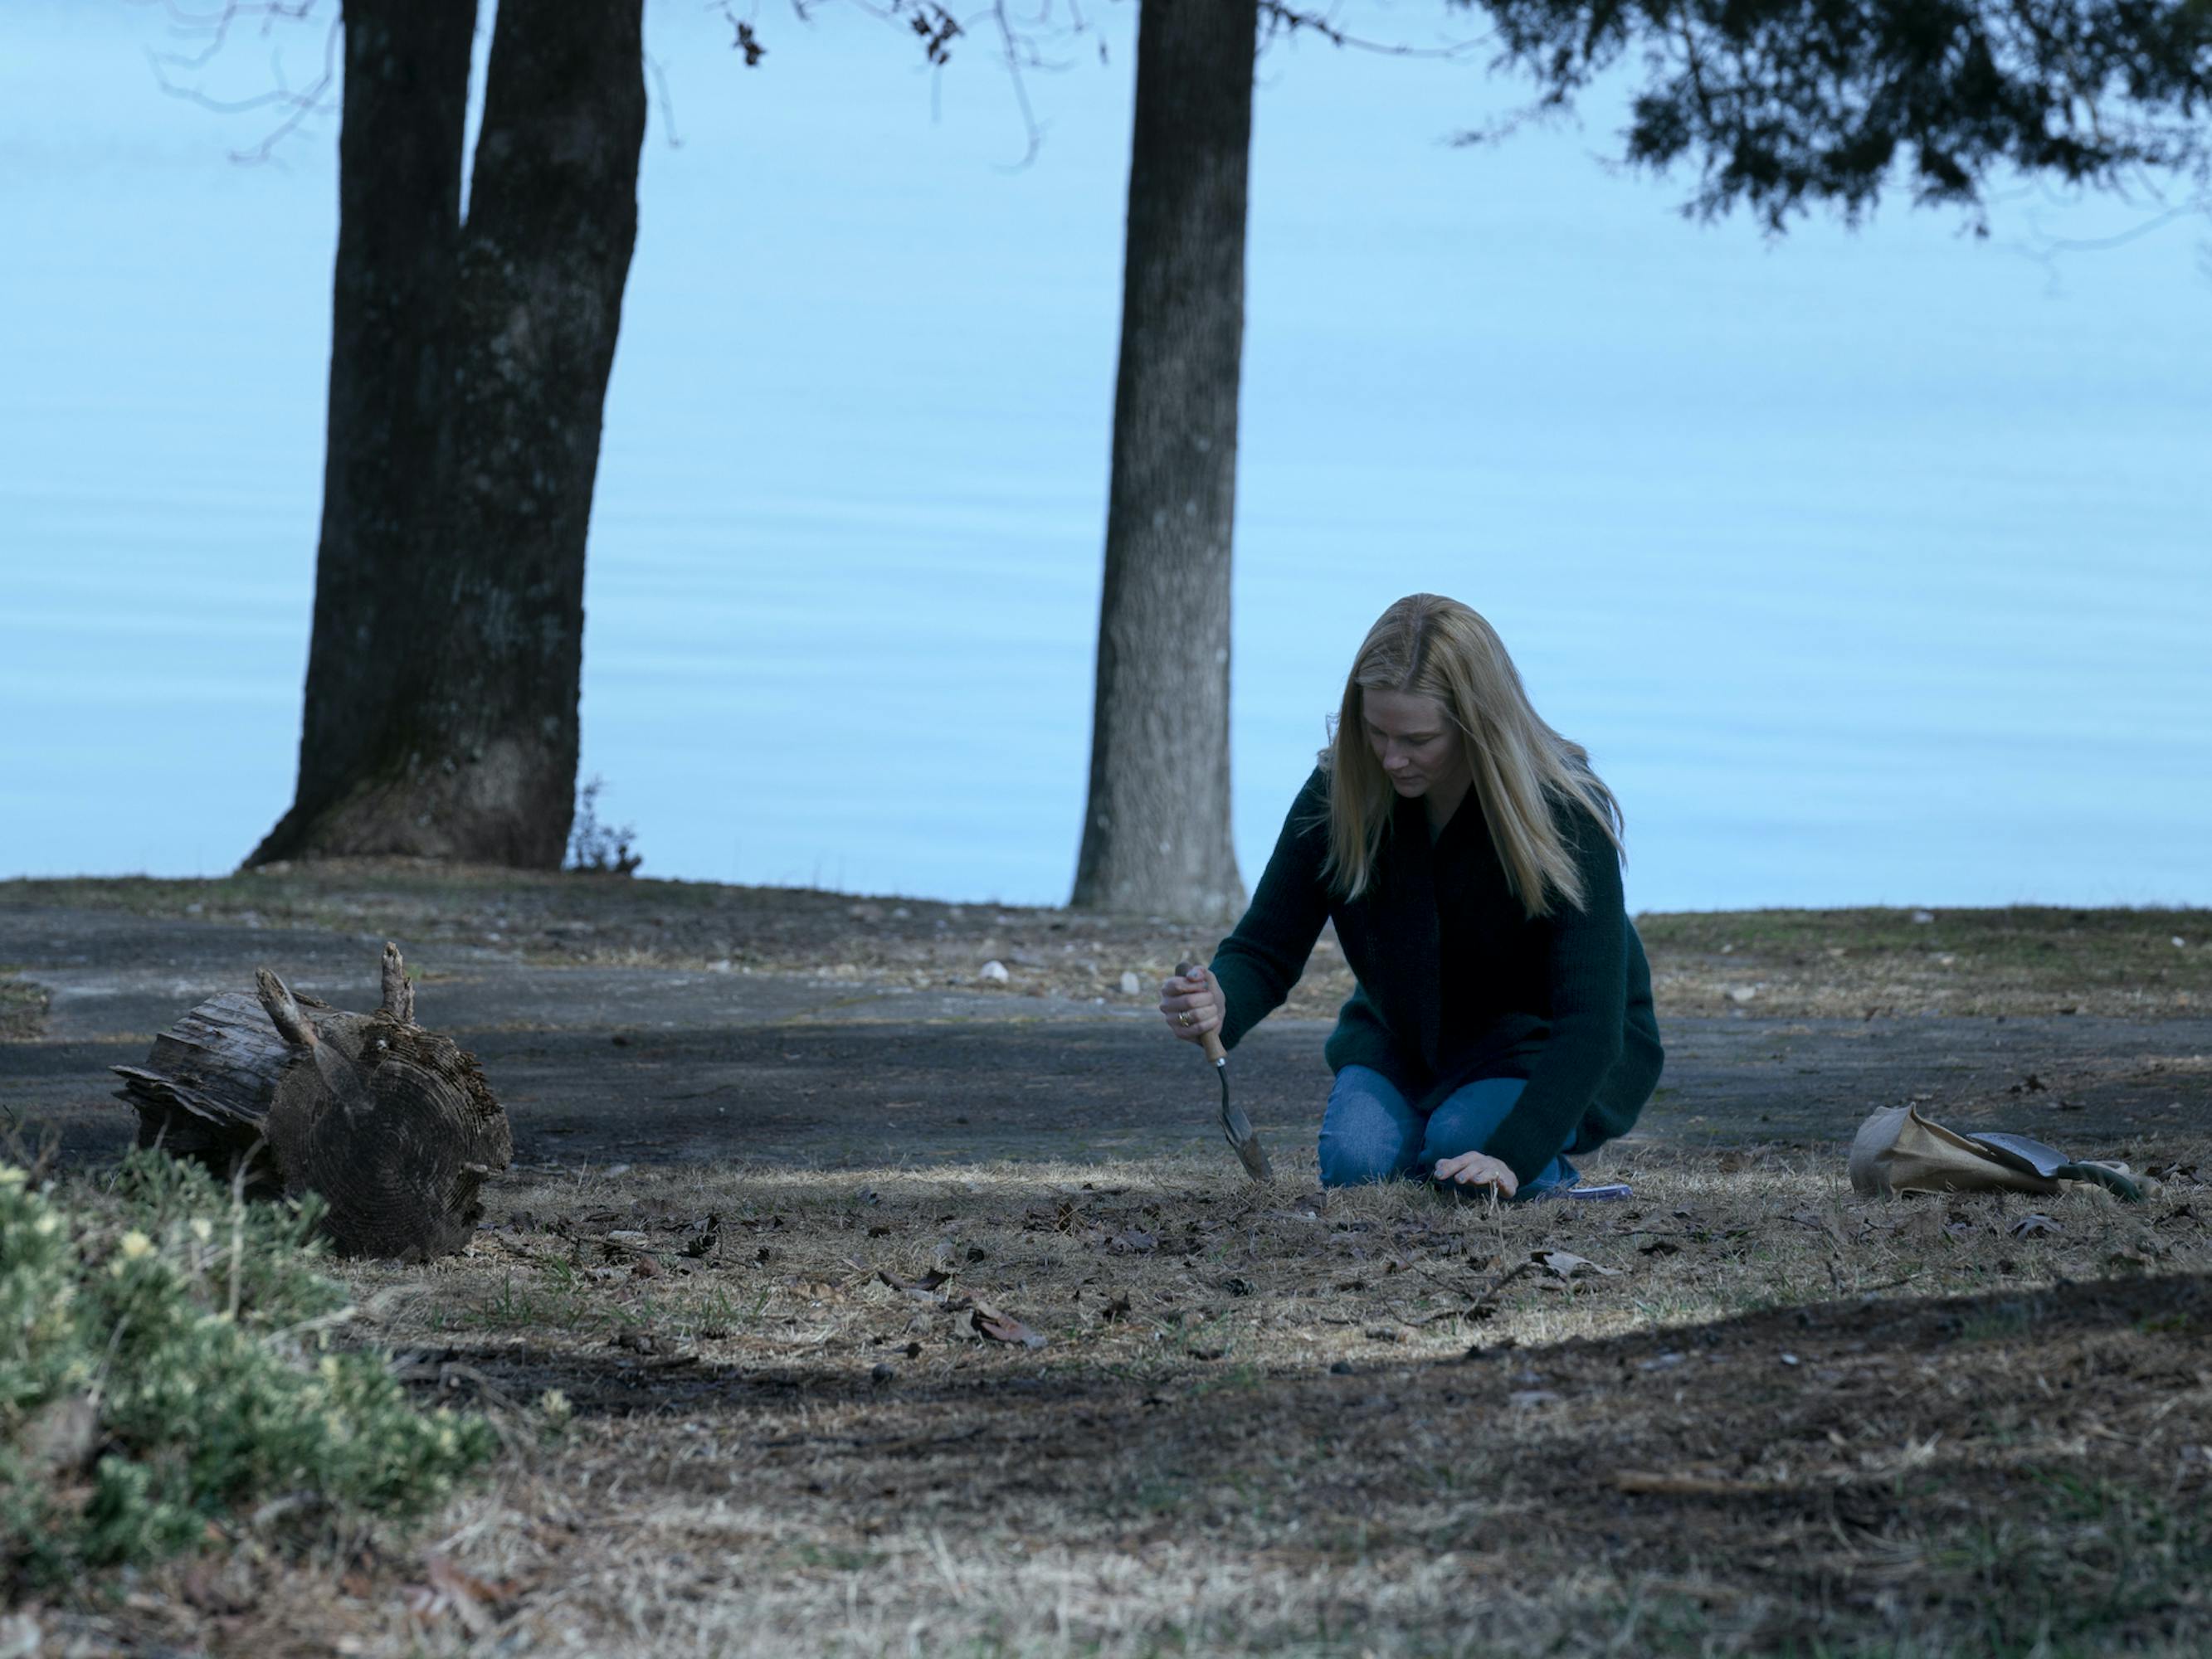 Wendy Byrde (Laura Linney) crouches in the dirt beside the water. What is she digging up, or else, burying?